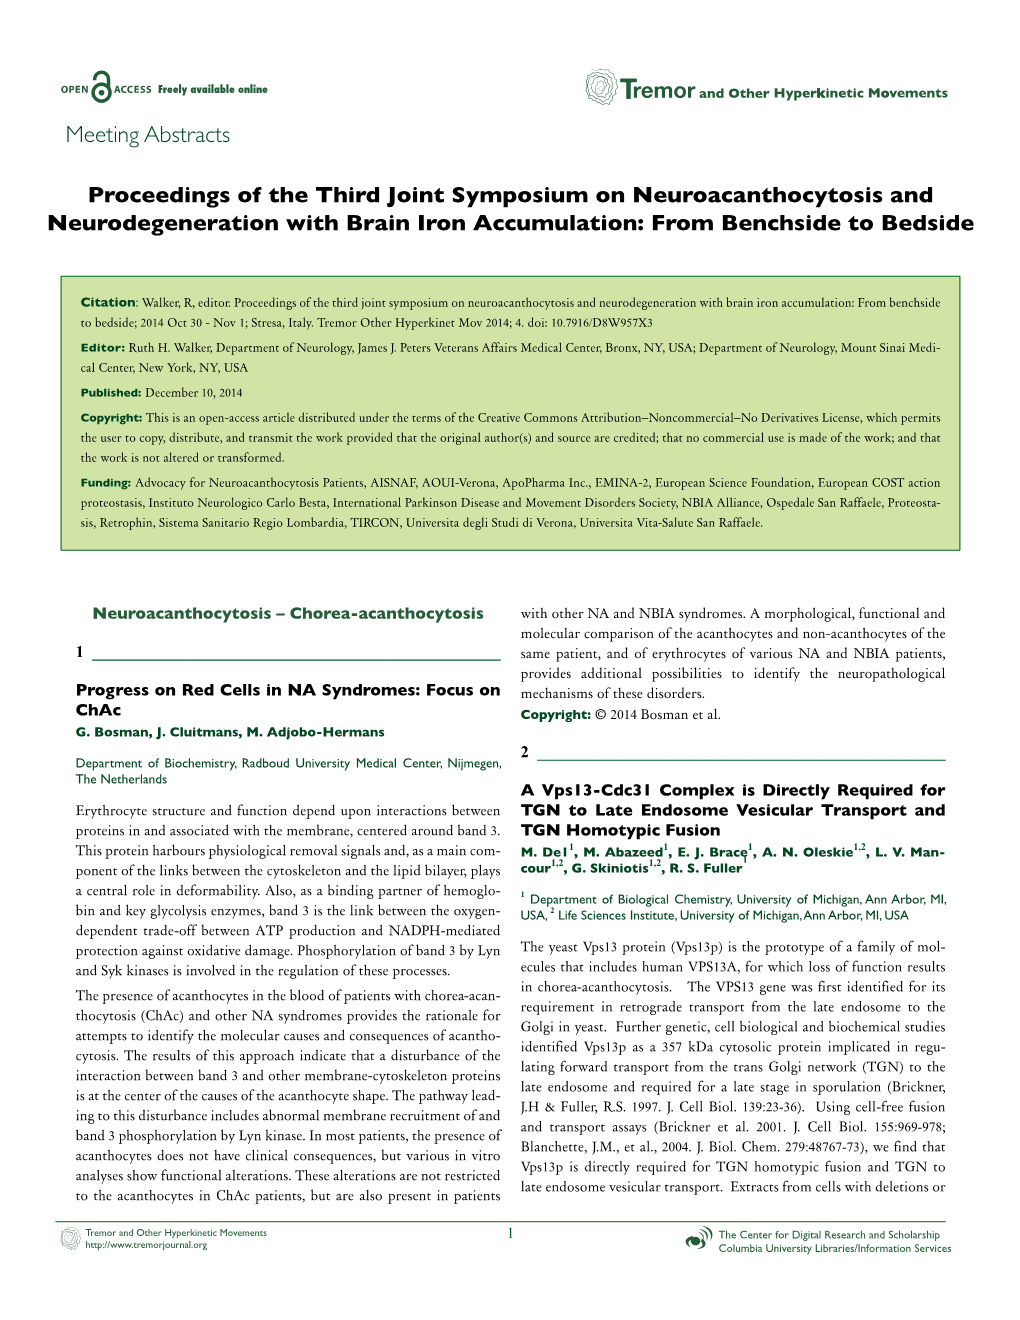 Proceedings of the Third Joint Symposium on Neuroacanthocytosis and Neurodegeneration with Brain Iron Accumulation: from Benchside to Bedside